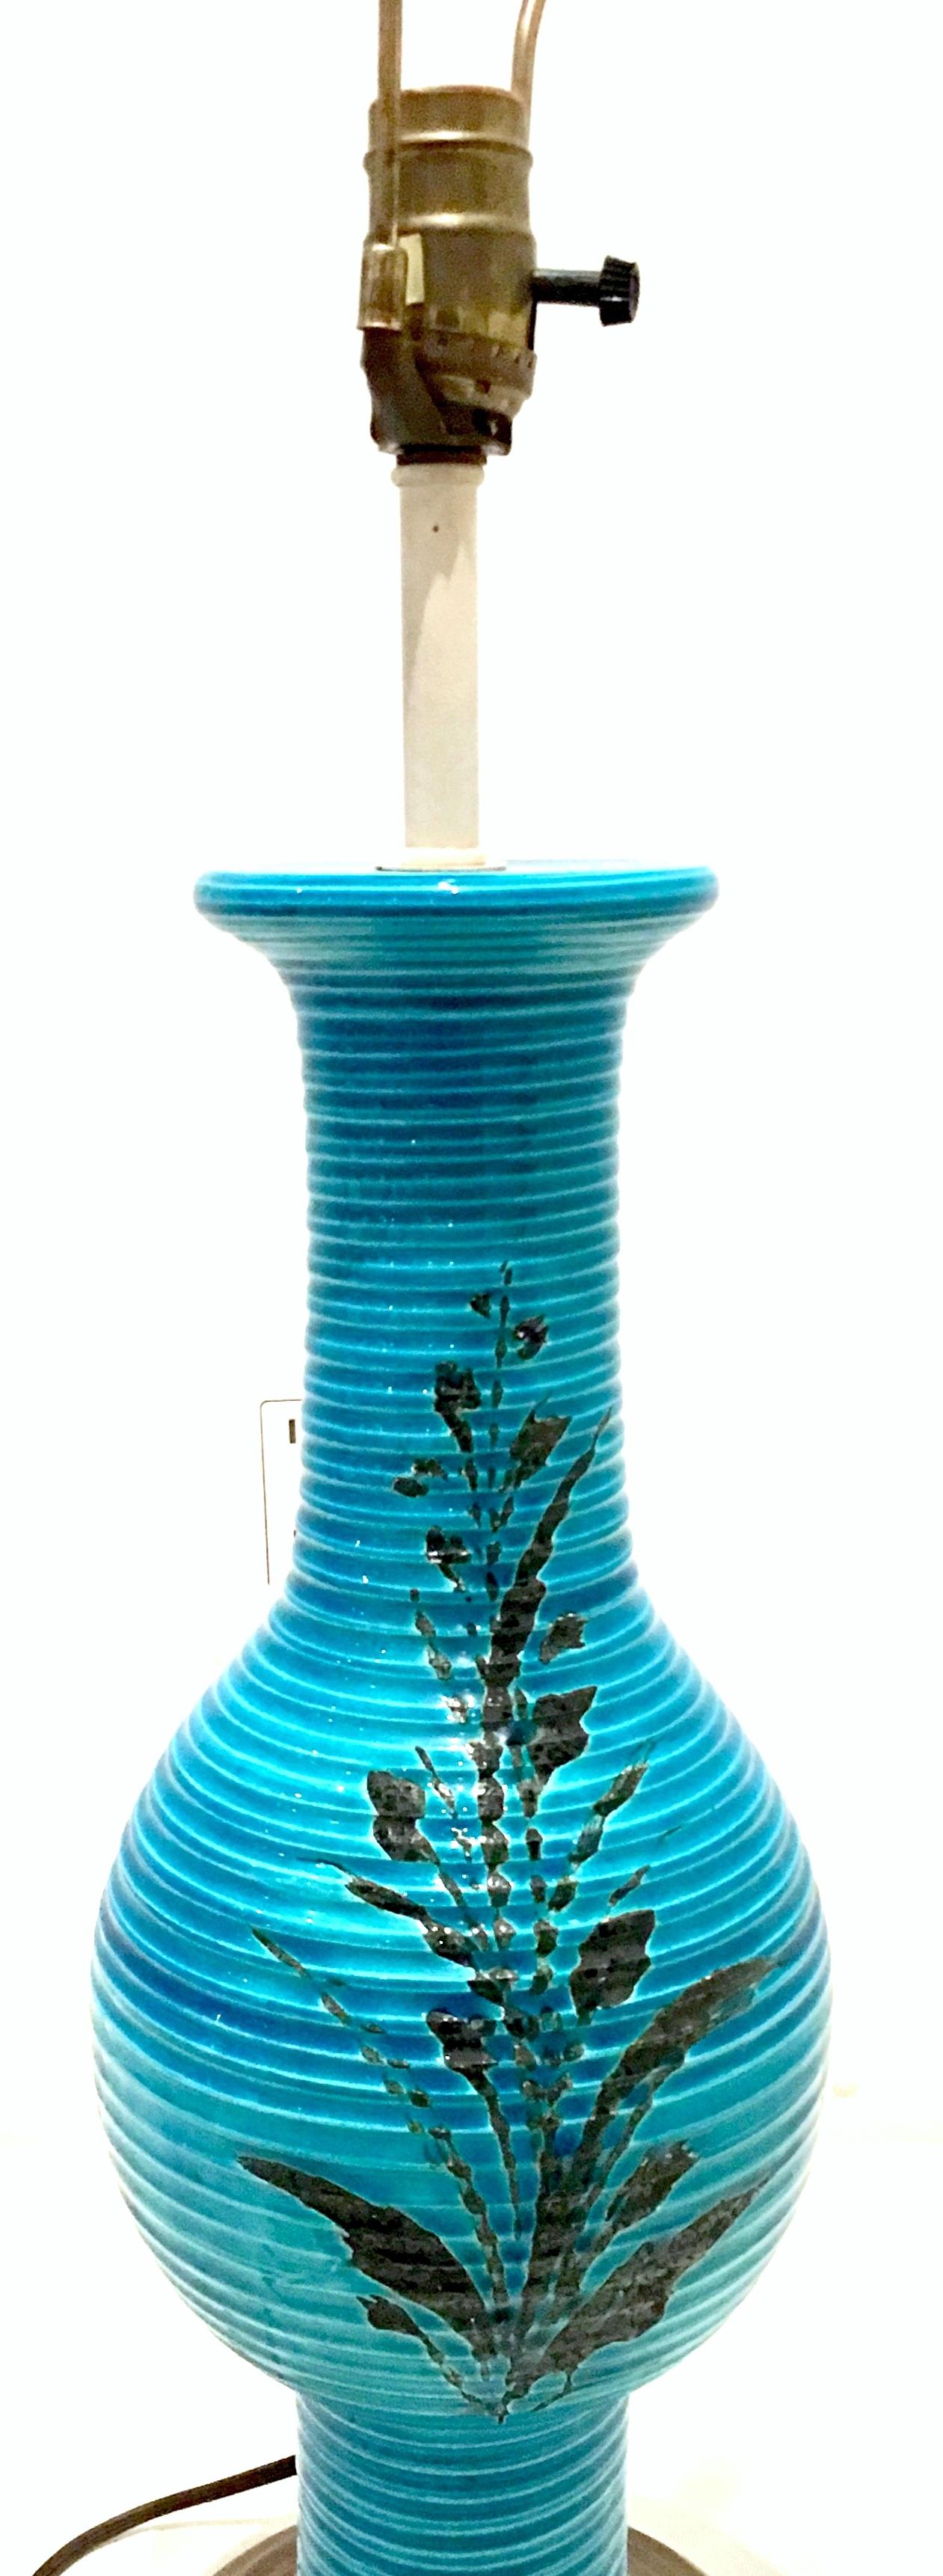 1960s Italian Cerulean Blue and Black Ceramic Glaze Pottery Lamp by, Bitossi For Sale 1